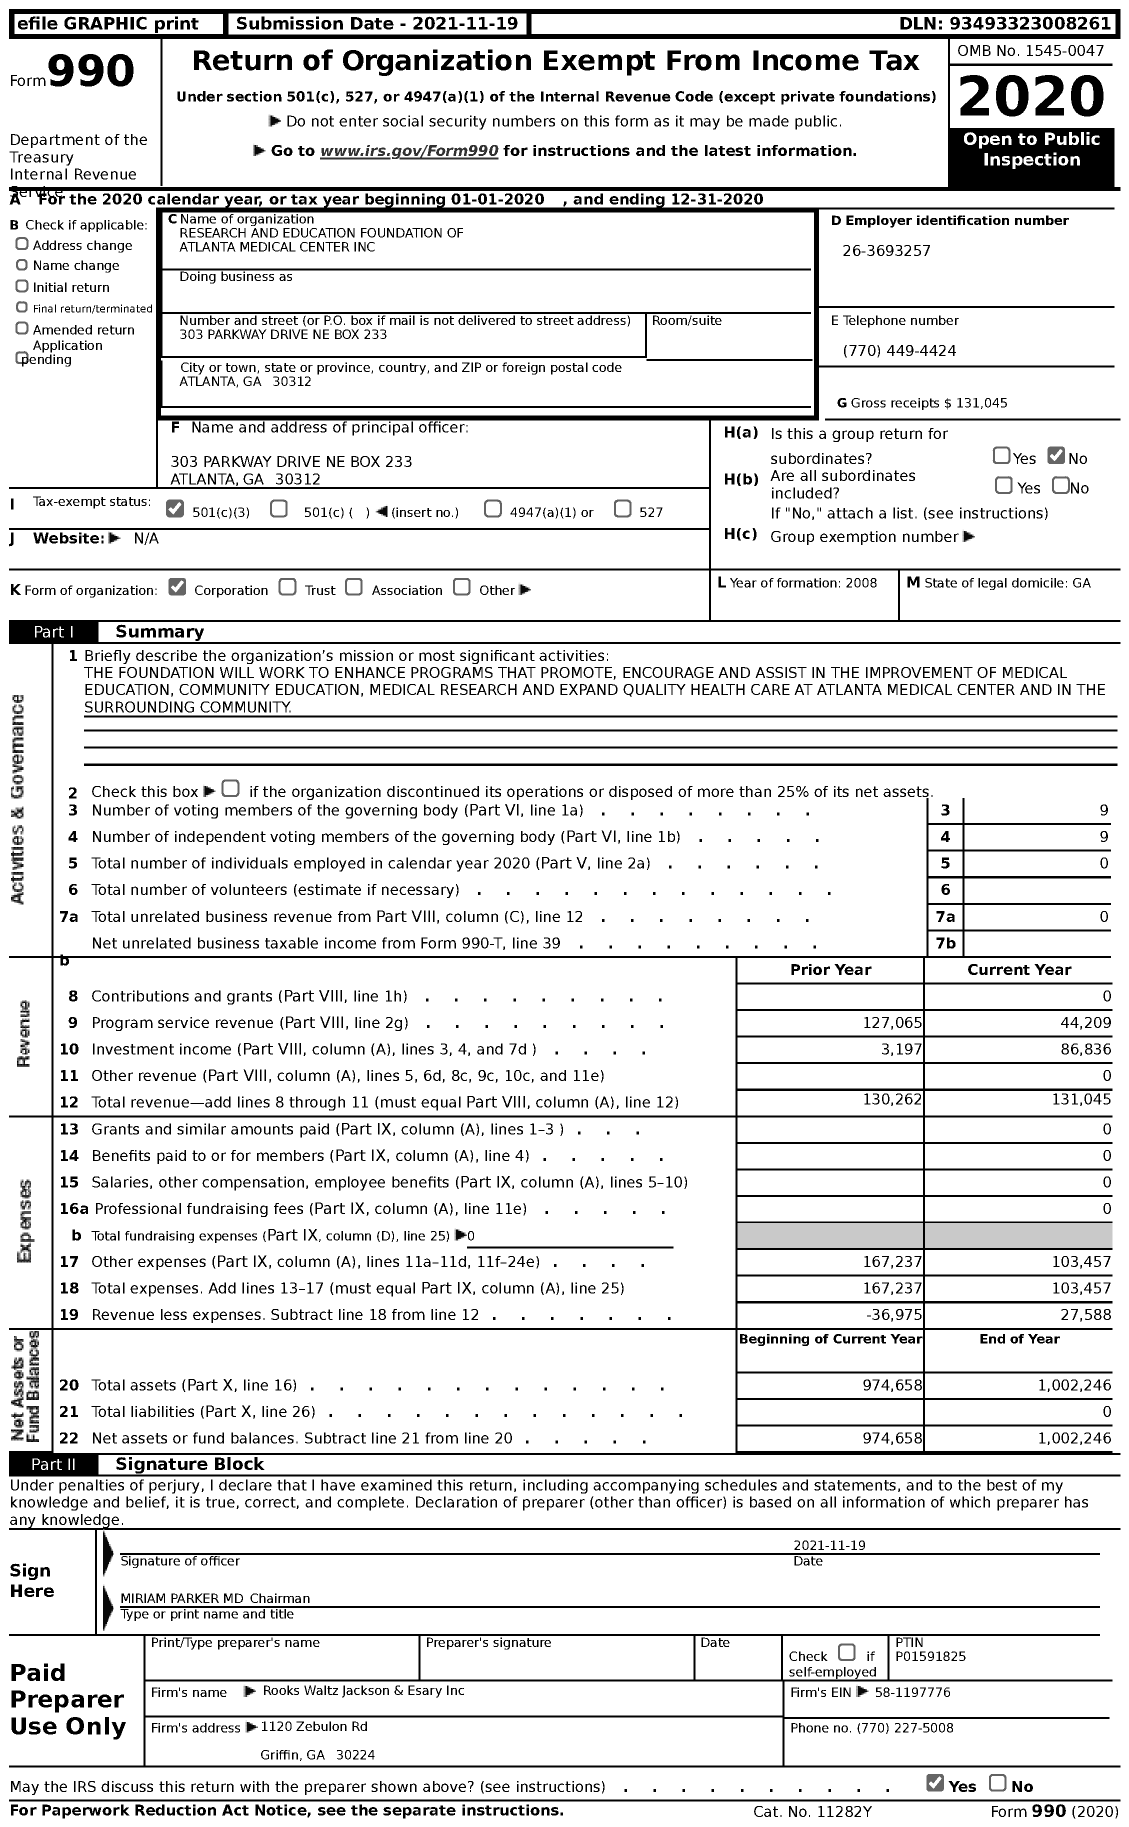 Image of first page of 2020 Form 990 for Research and Education Foundation of Atlanta Medical Center